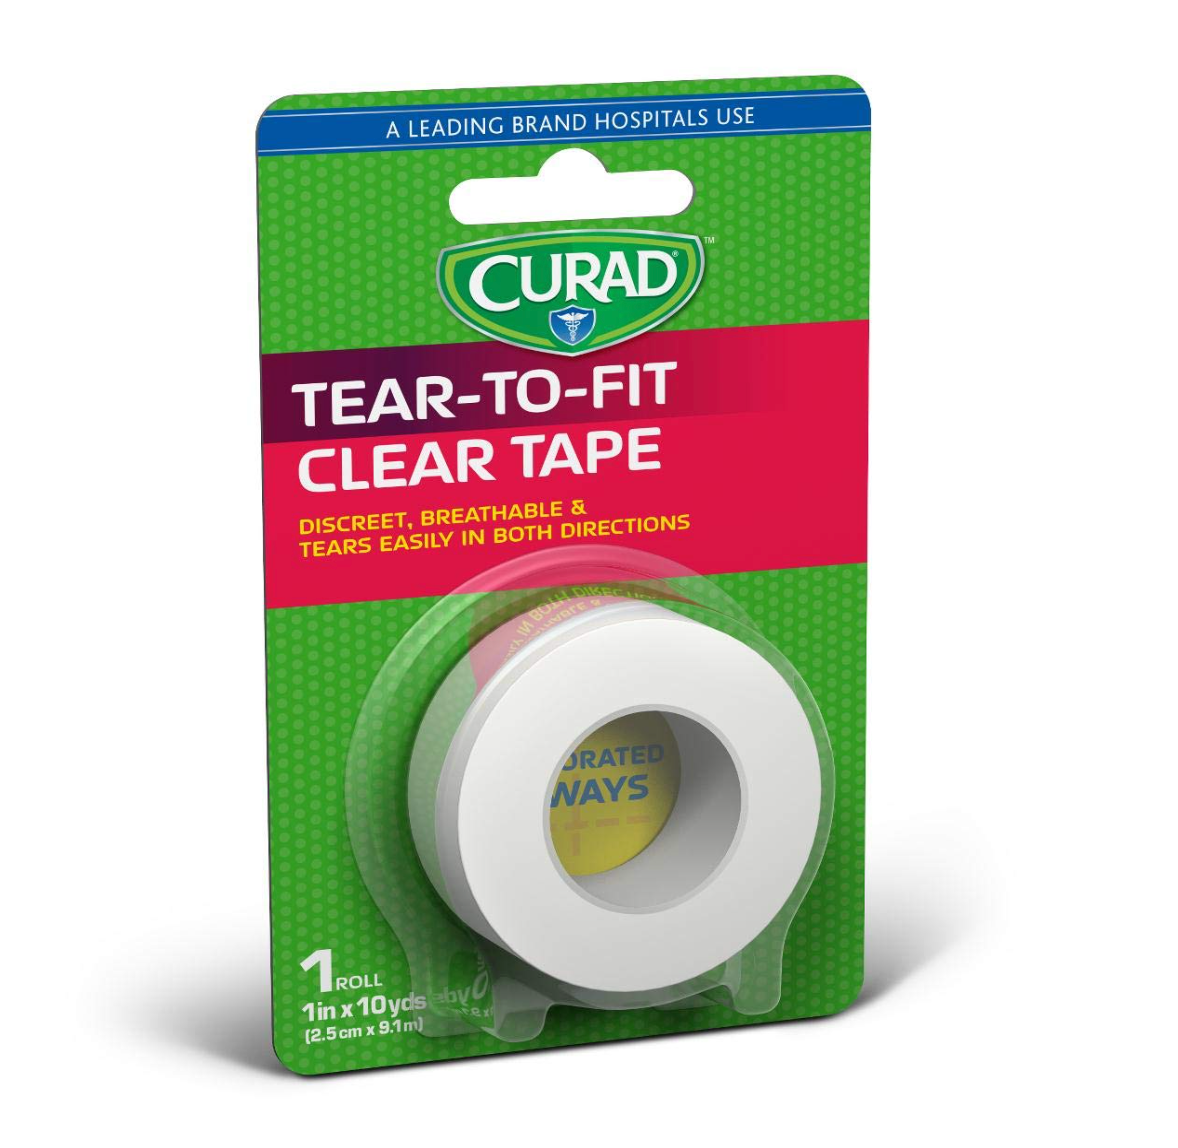 Curad Transparent Adhesive Plastic Tape, for Dressings, IVs, and Tubing, 1" x 10 yd